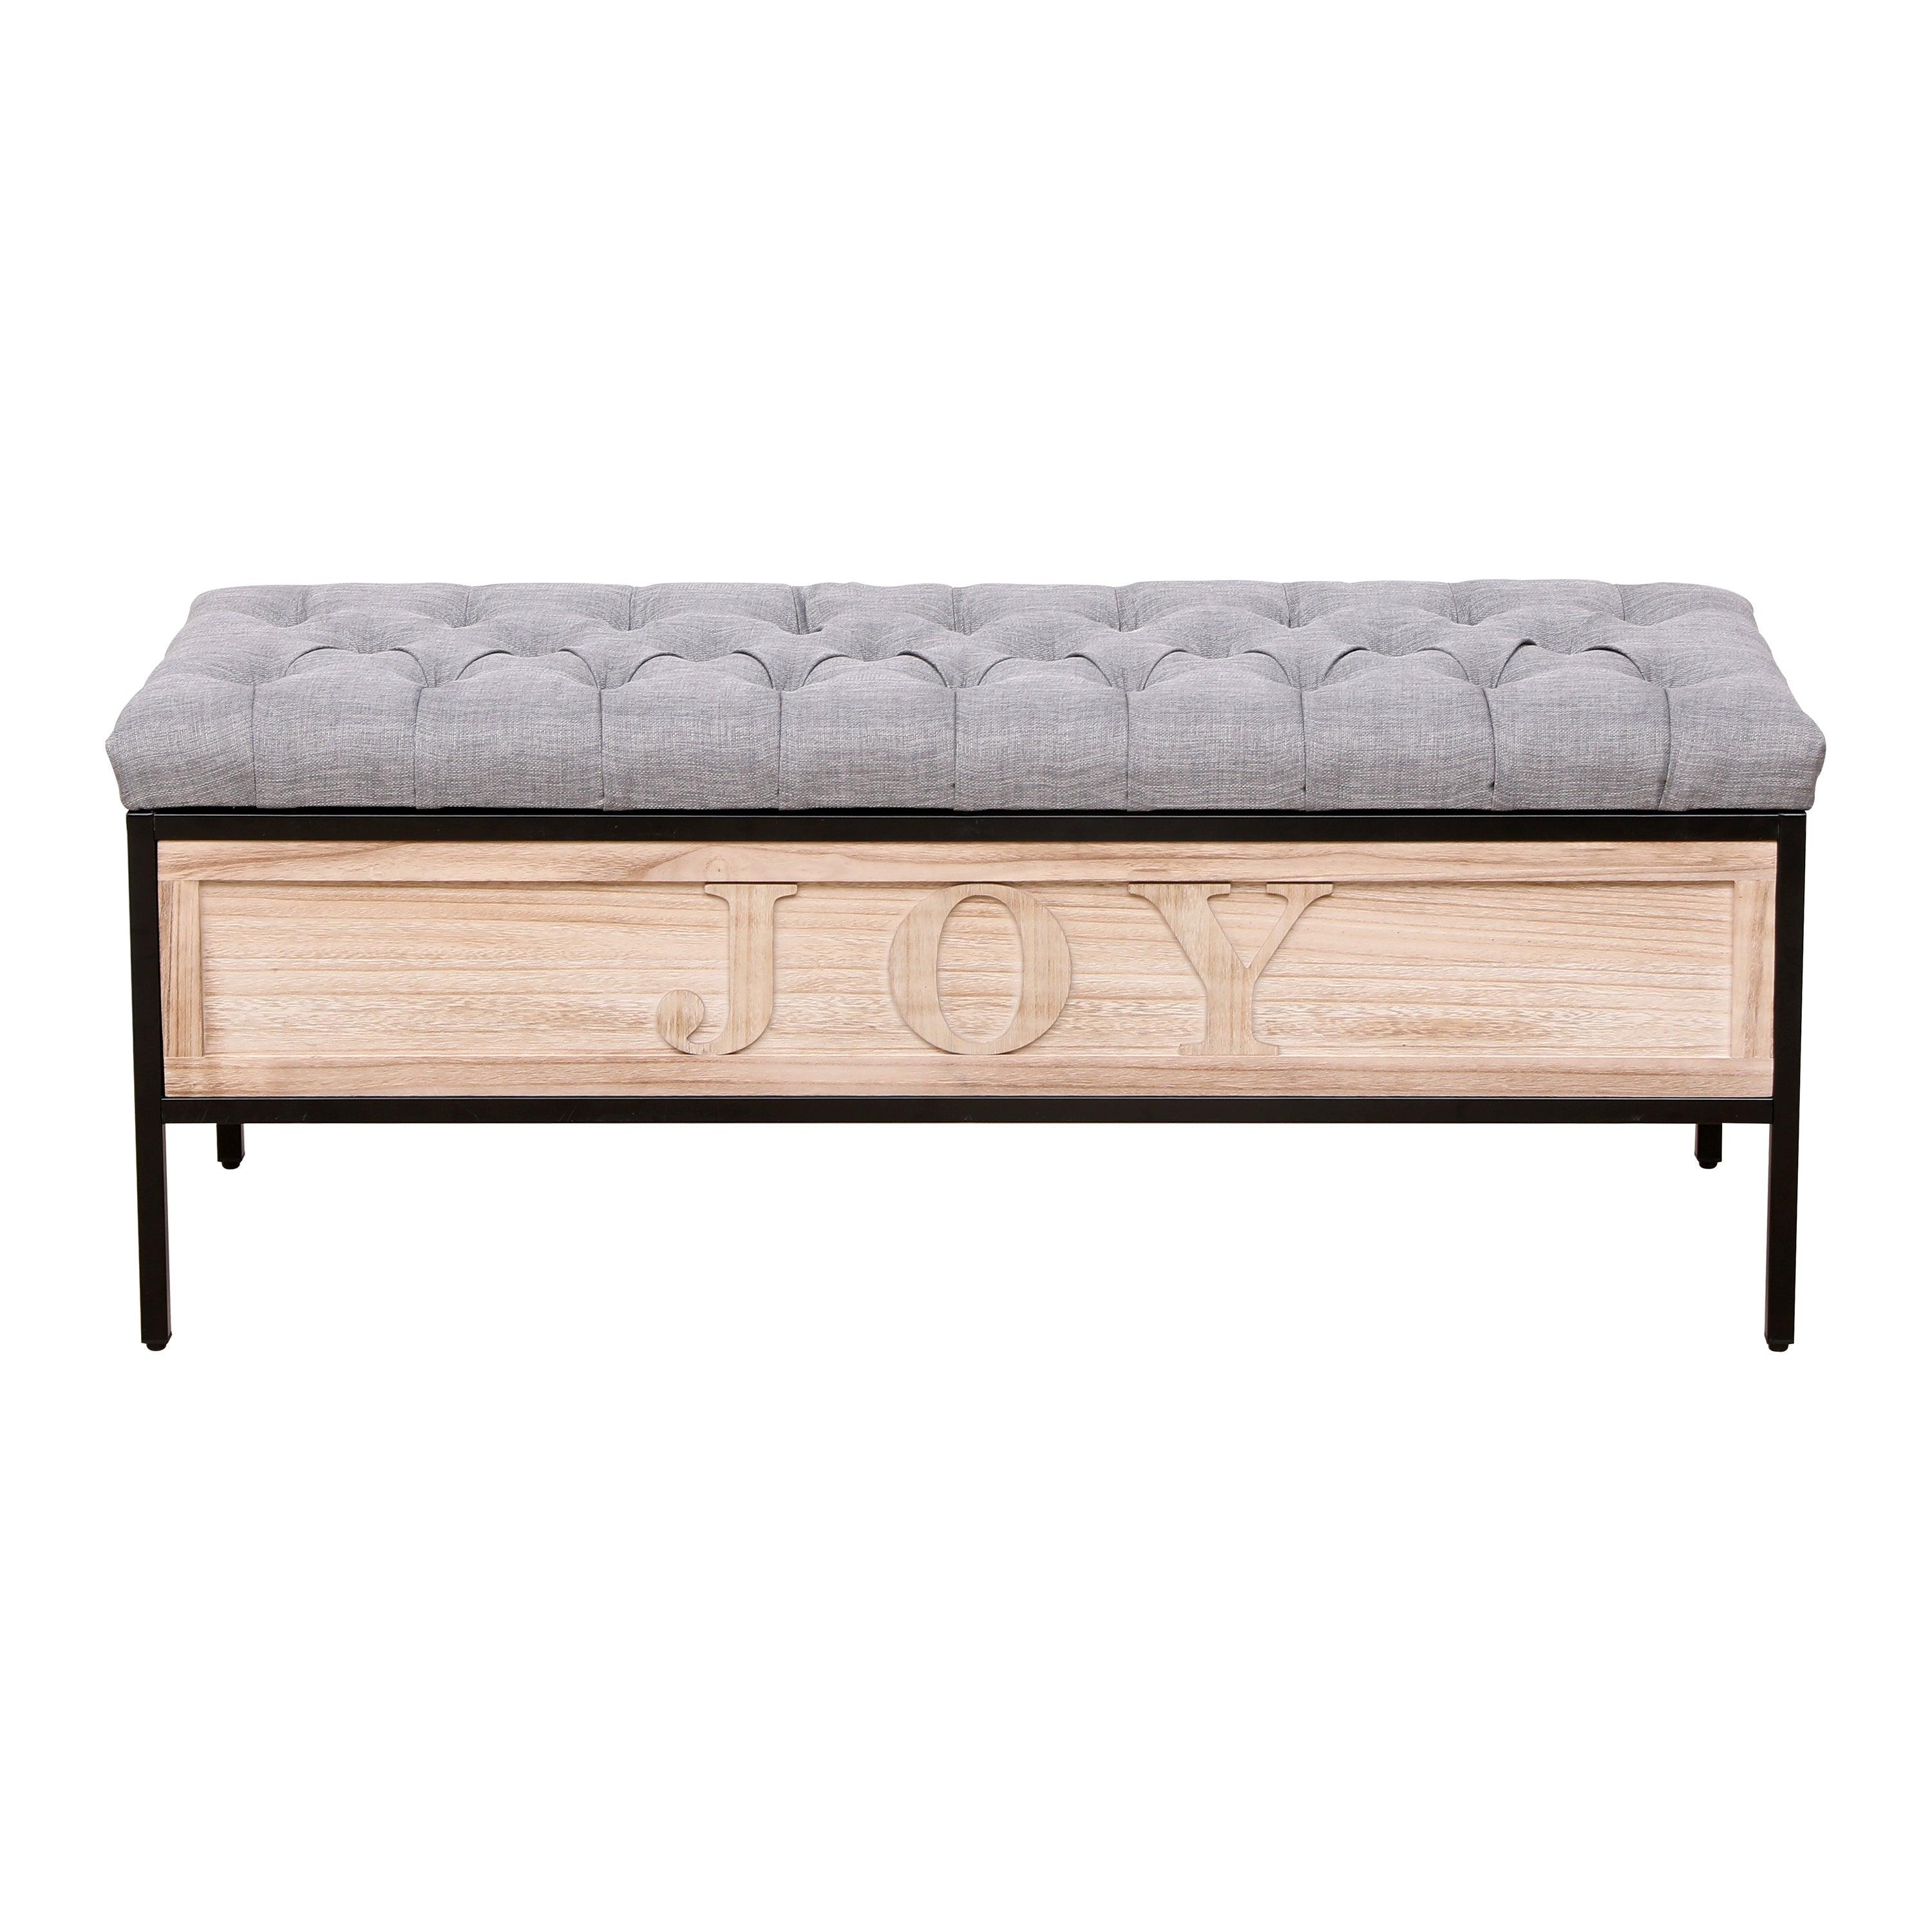 48'' Storage Bench Linen Upholstered End of Bed Storage Benches with Button Tufted Wooden JOY Ottoman for Bedroom, Living Room (Gray) LamCham